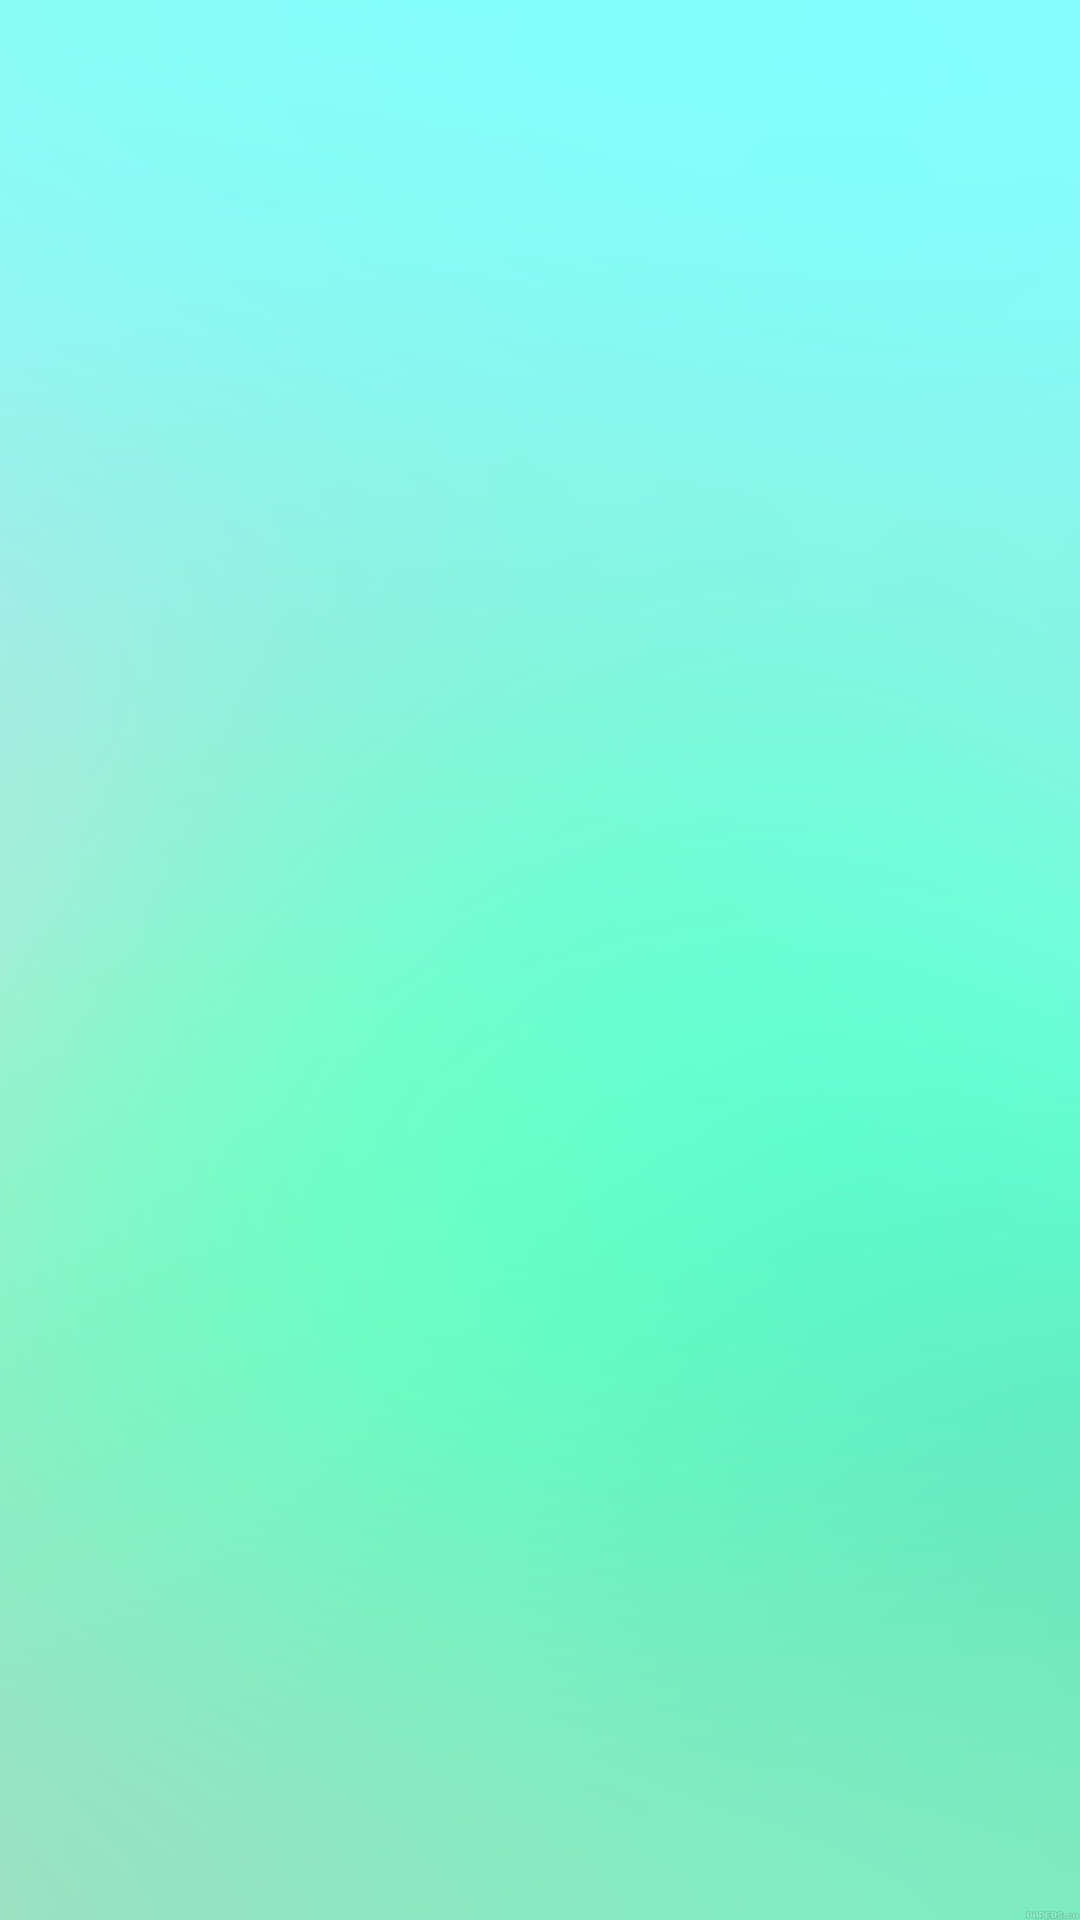 Blue Ombre Background Light Blue To Light Green Surface